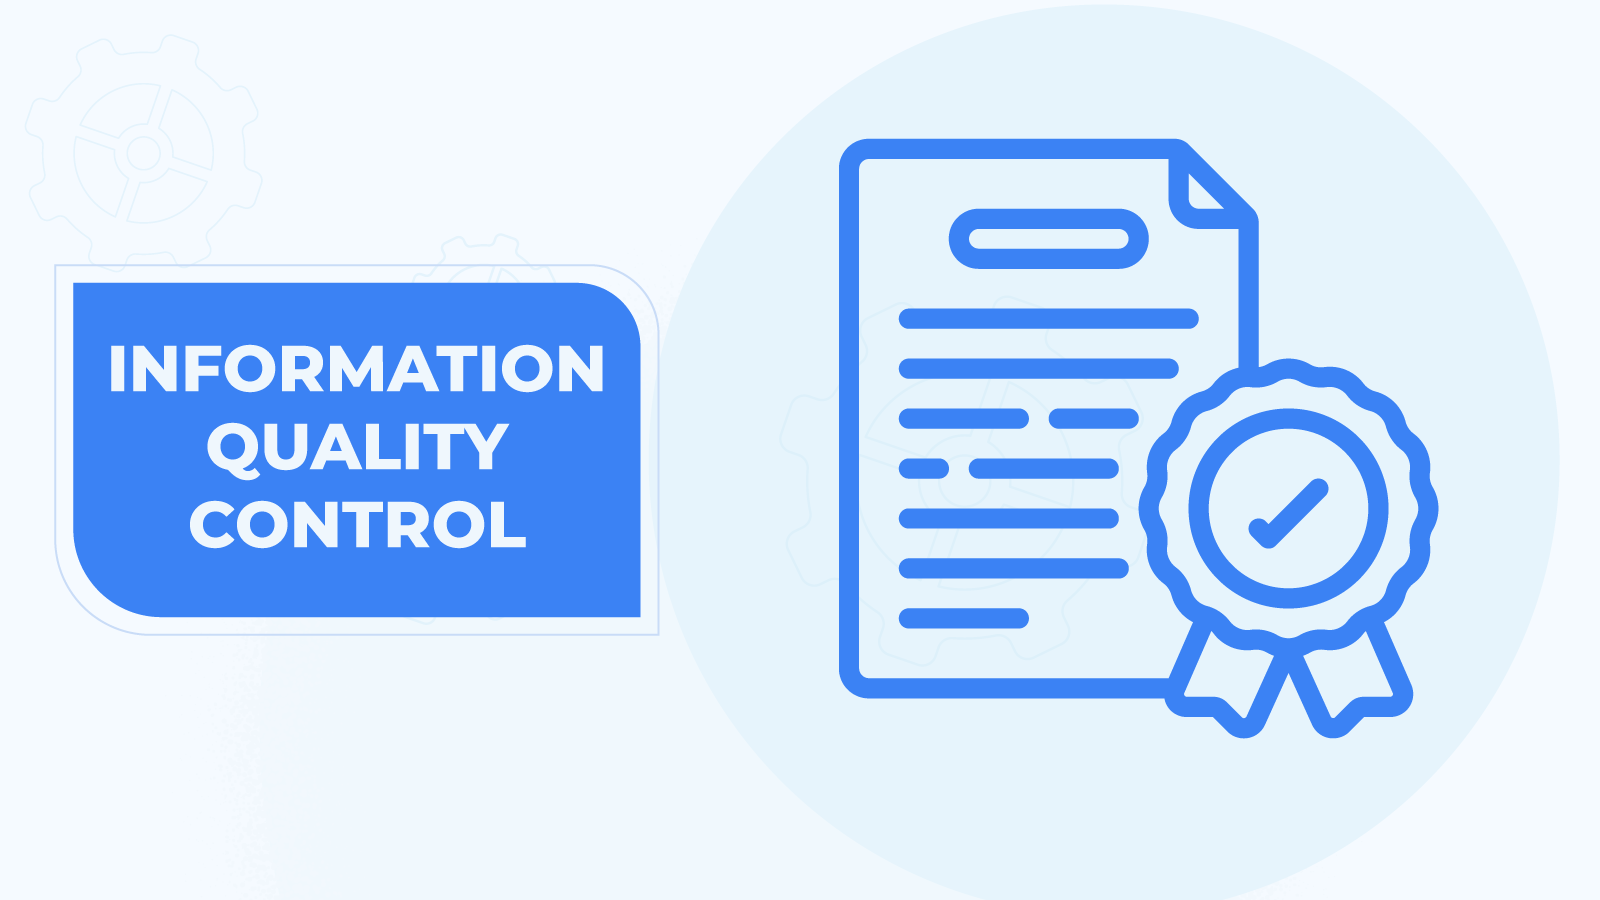 Information quality control